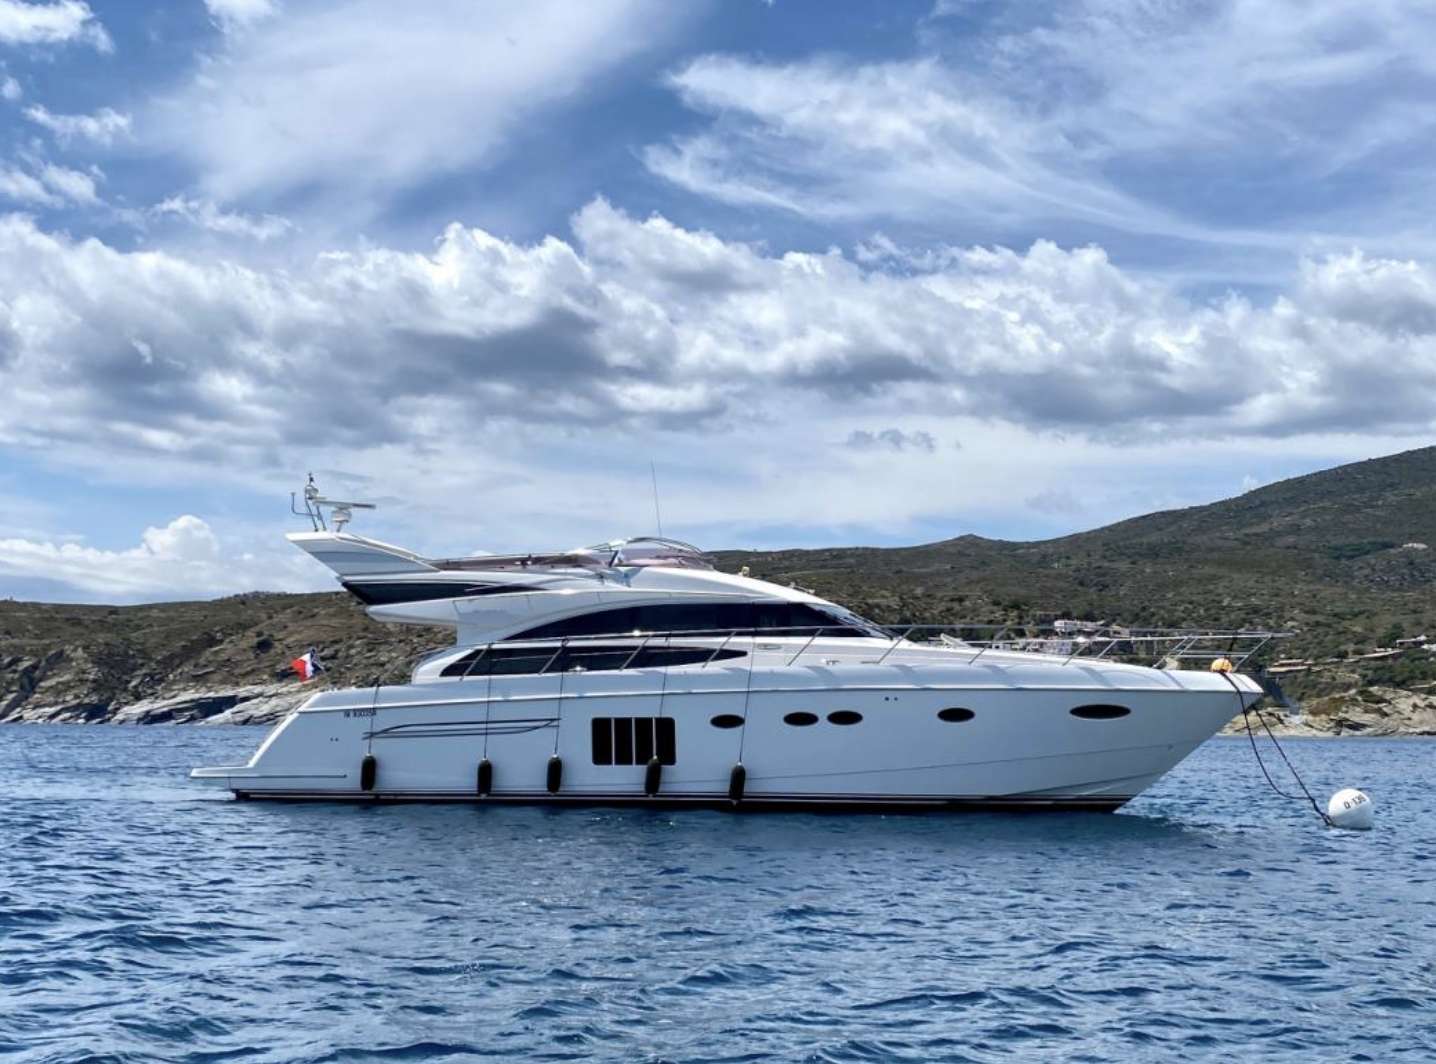 Princess 64 - Luxury yacht charter France & Boat hire in France French Riviera Frejus Port Fréjus 1